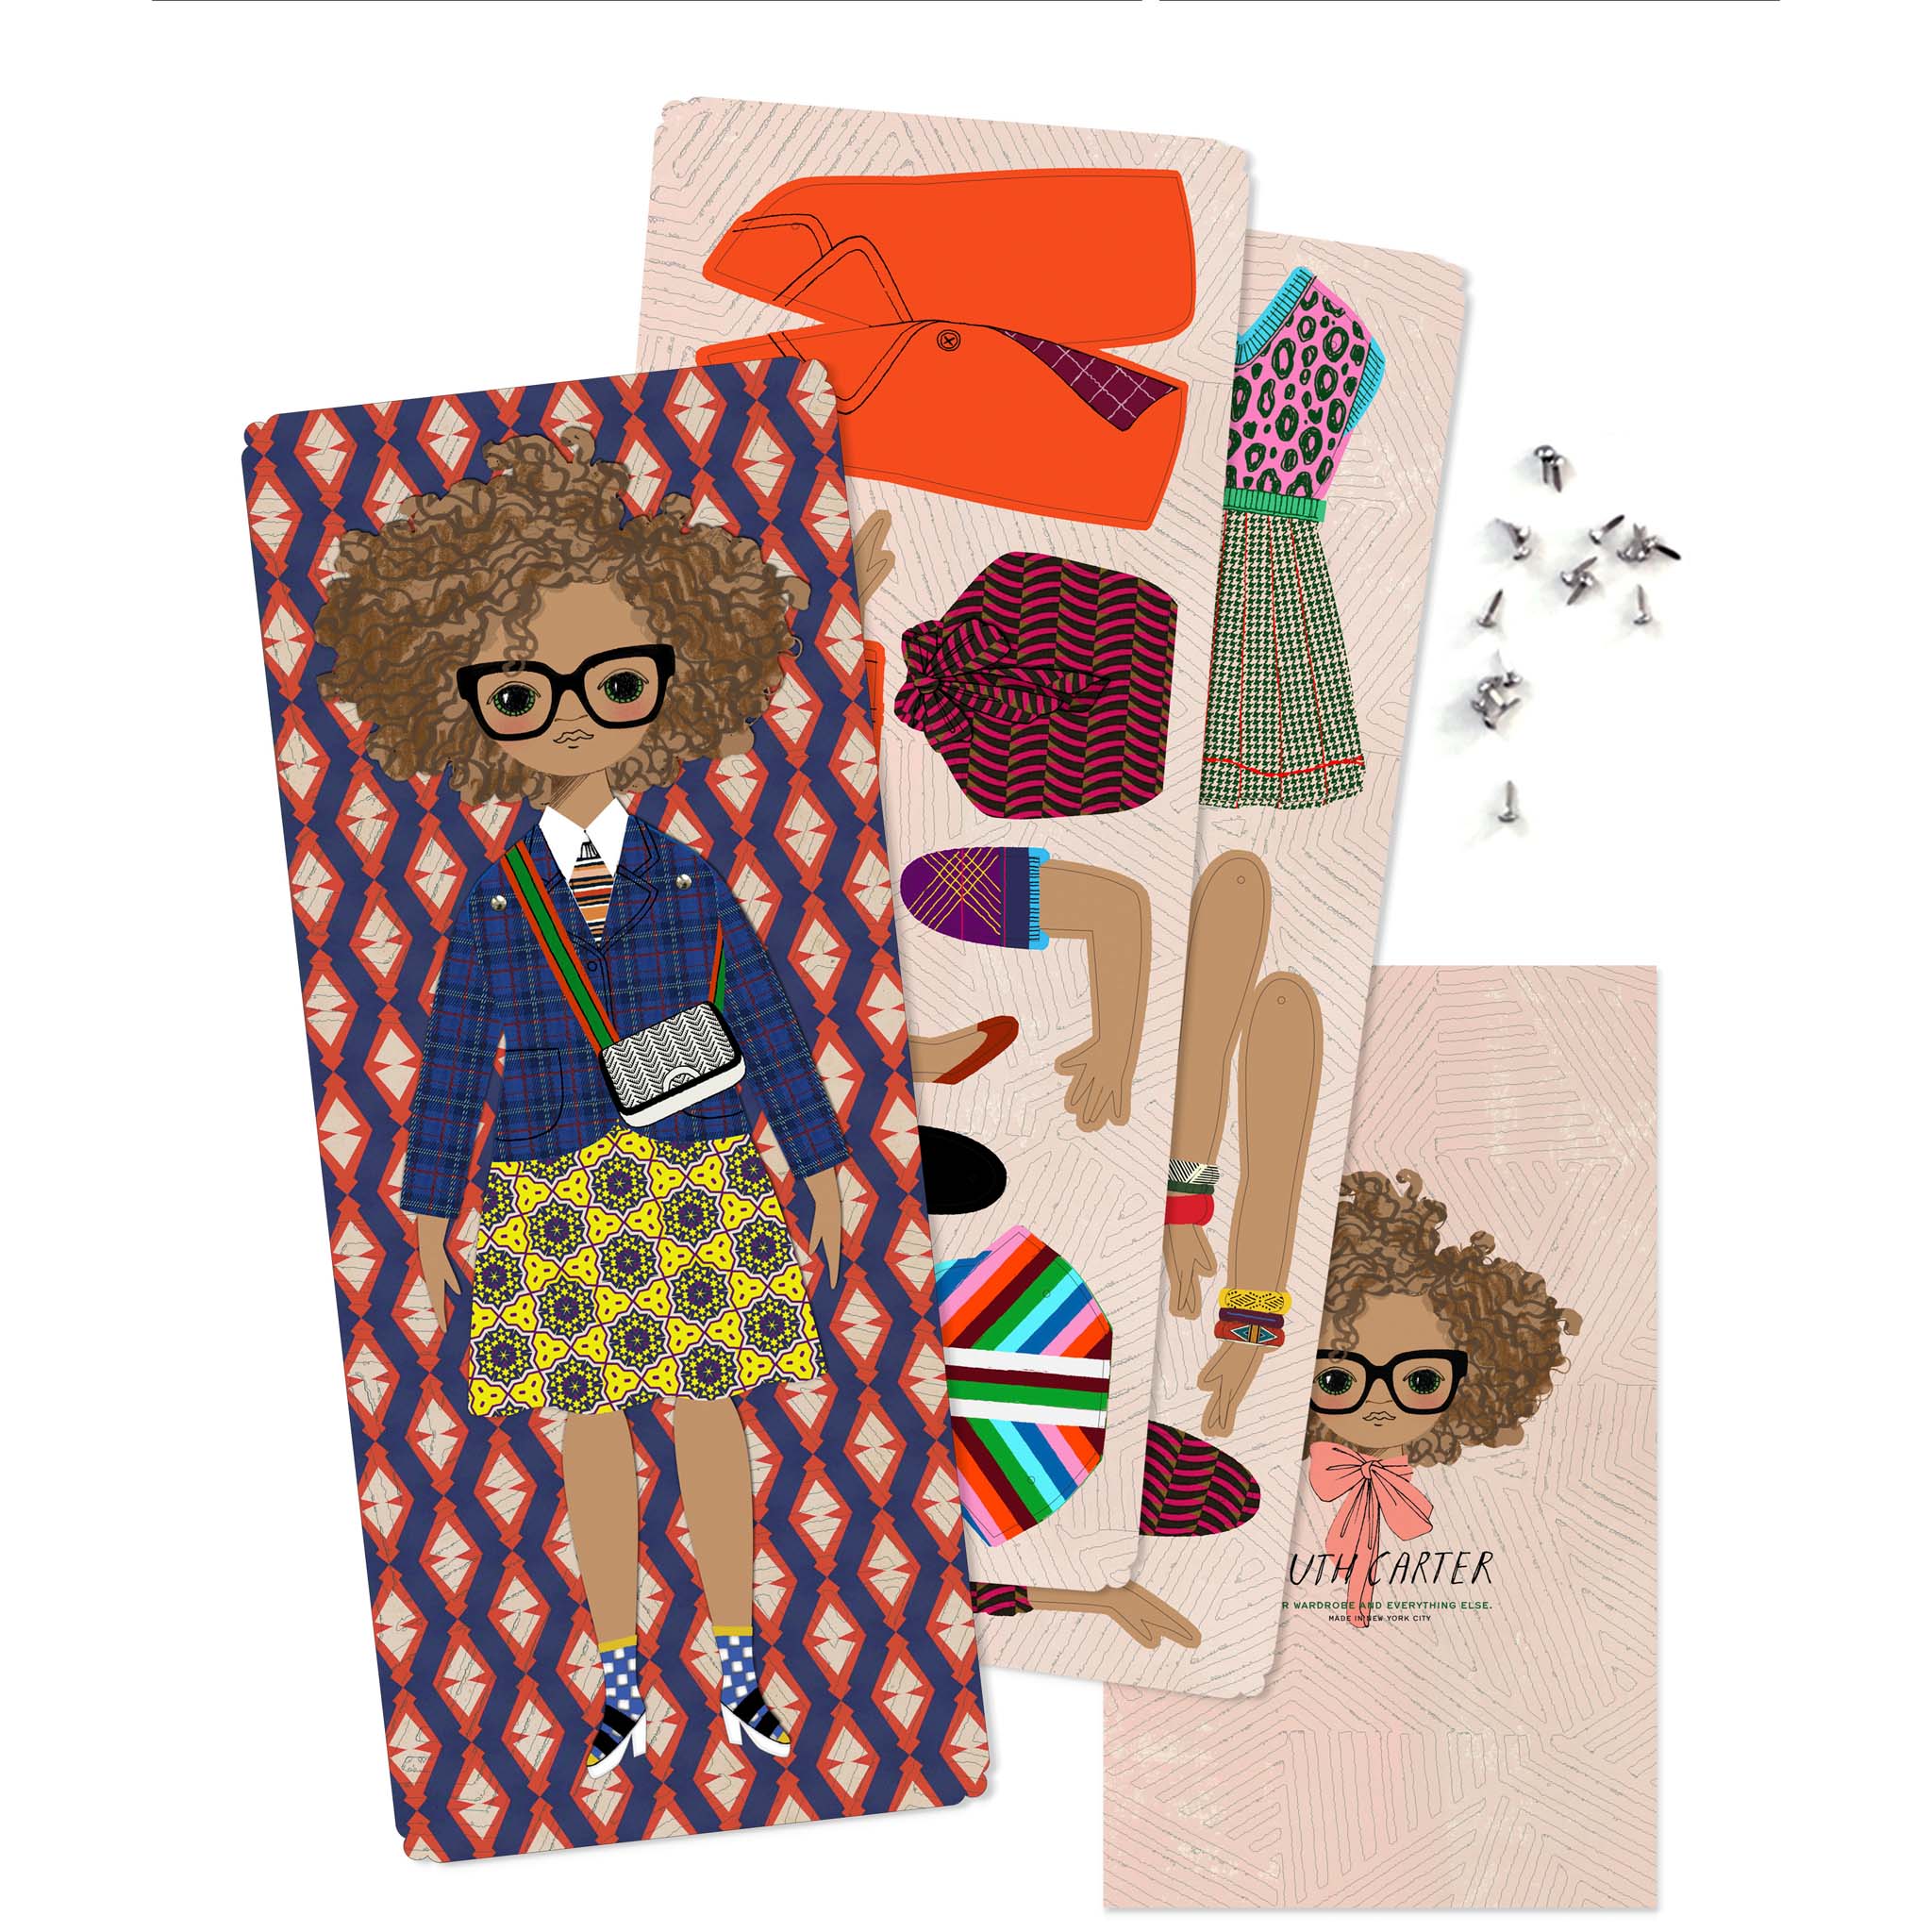 RUTH CARTER PAPER DOLL KIT